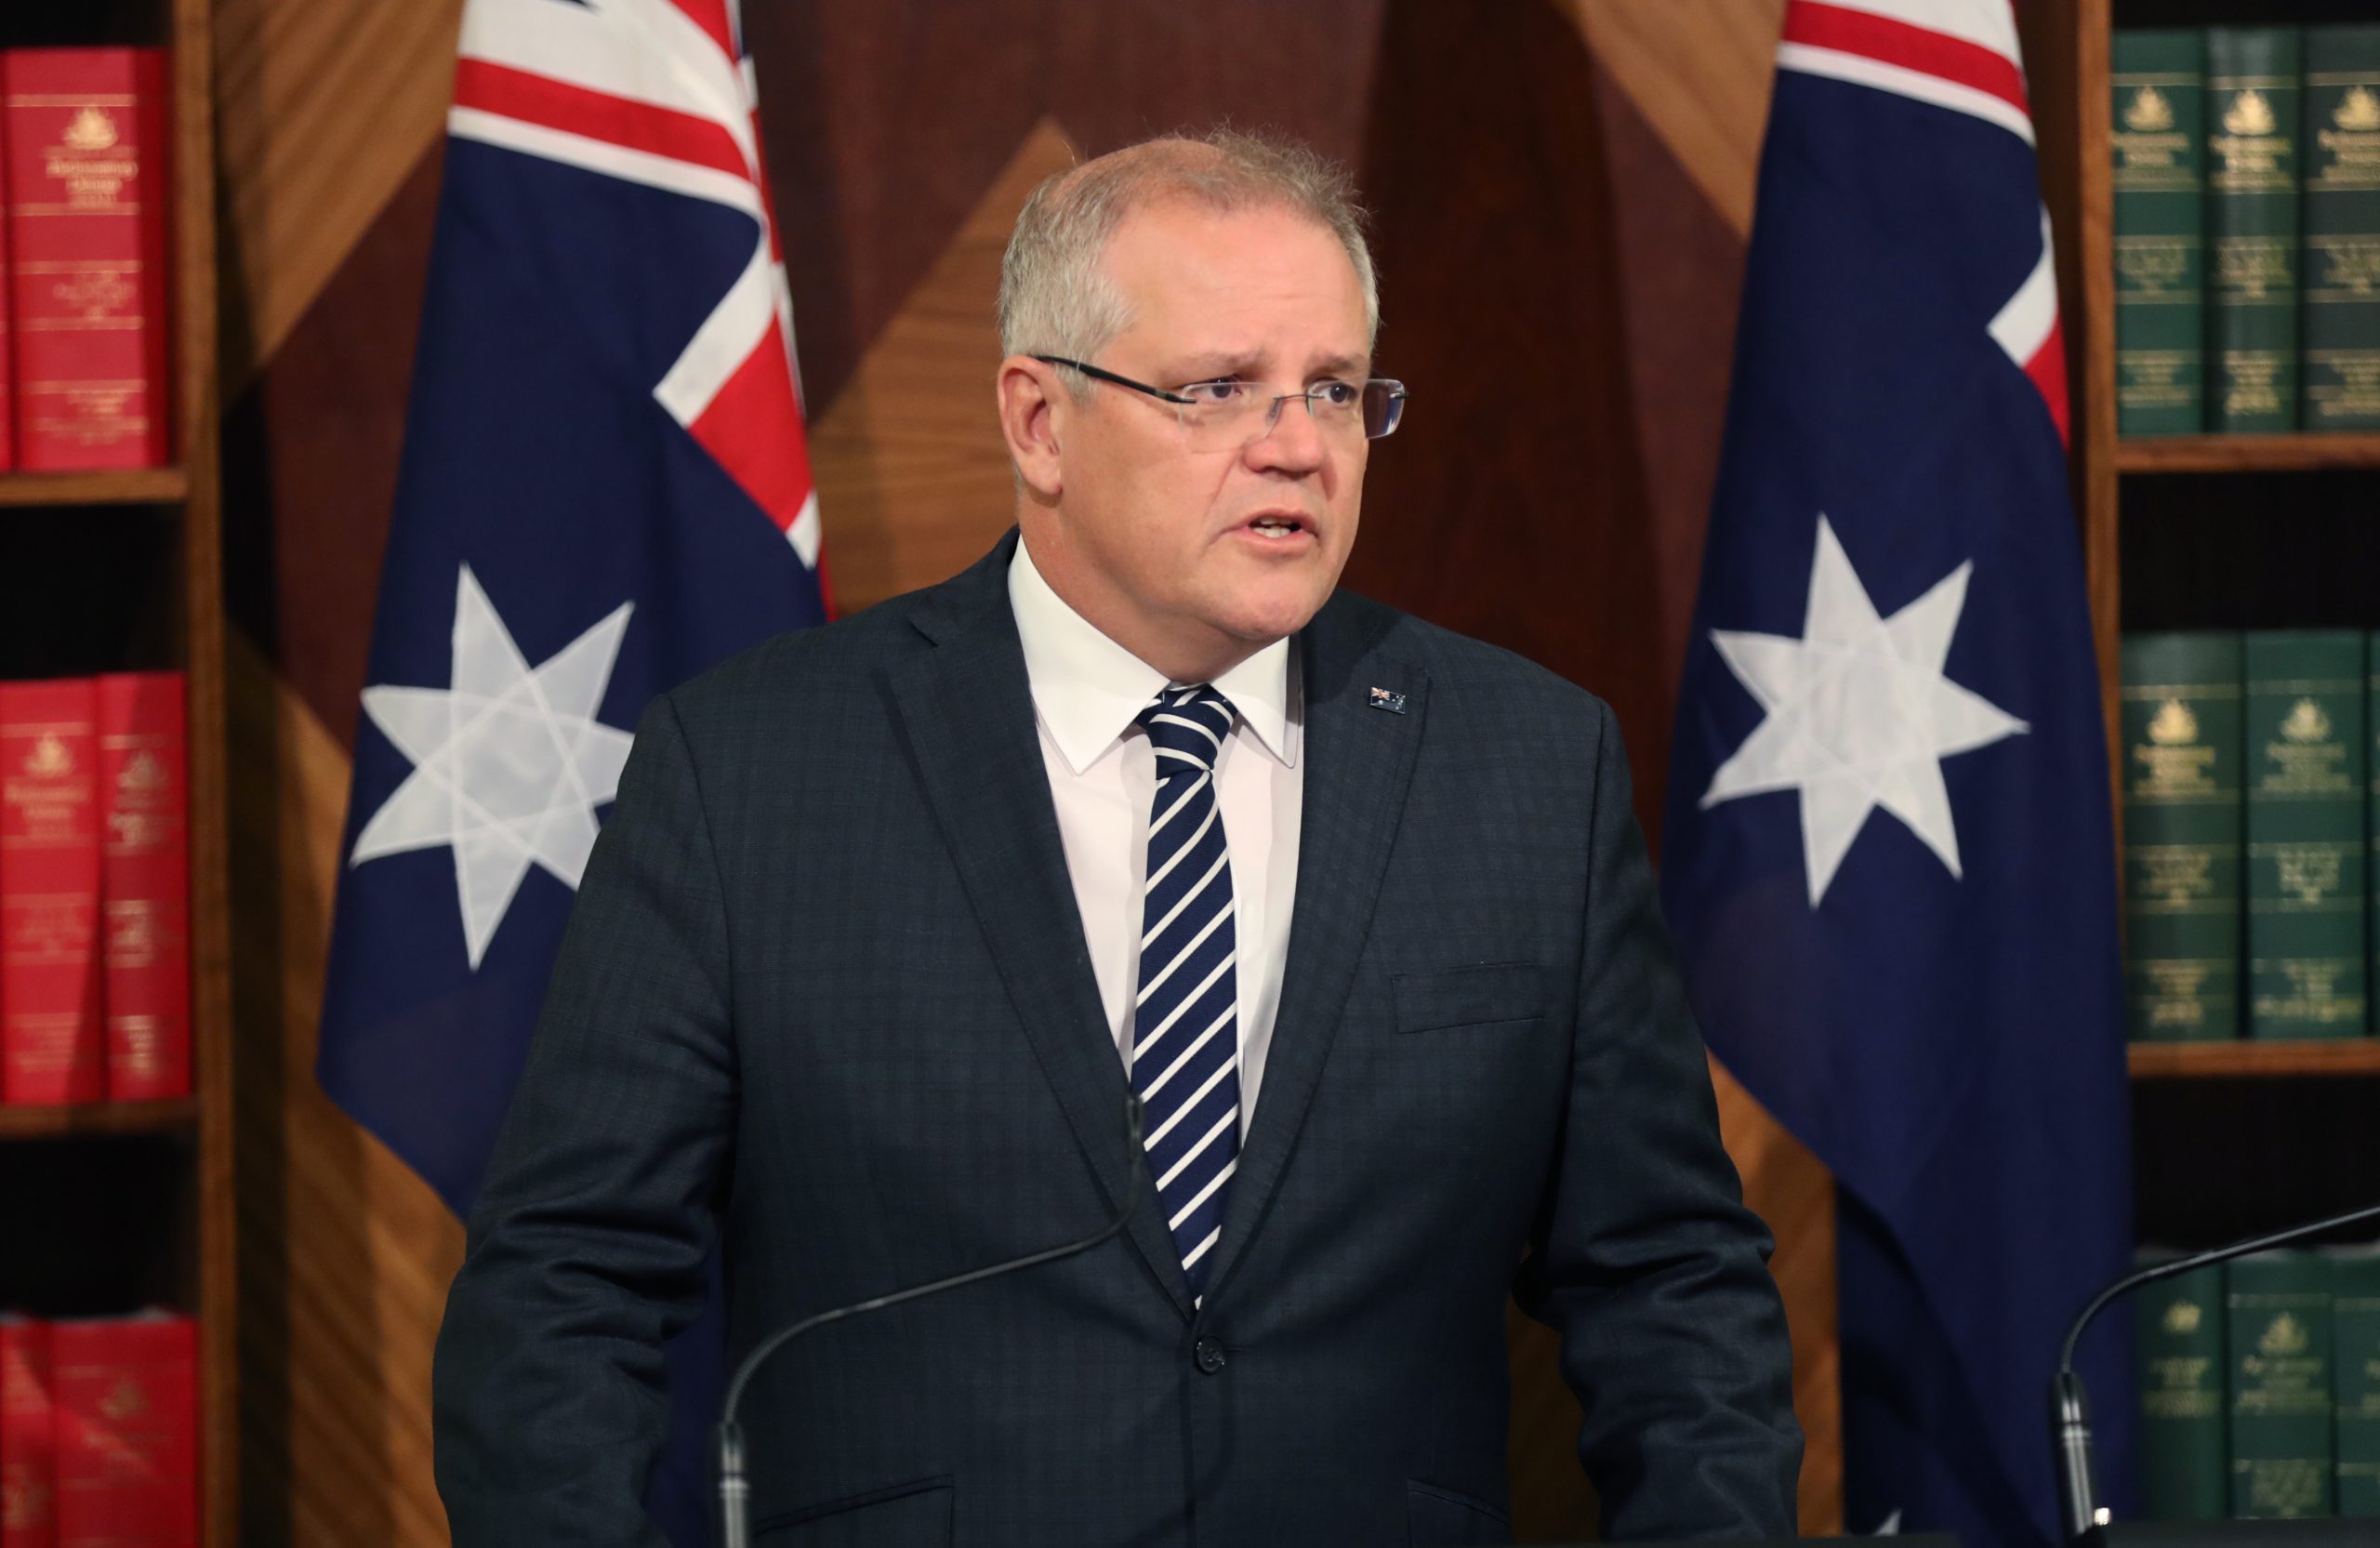 epa08064304 Prime Minister Scott Morrison speaks to the media during a press conference in Melbourne, Australia, 12 December 2019.  EPA/DAVID CROSLING NO ARCHIVING AUSTRALIA AND NEW ZEALAND OUT